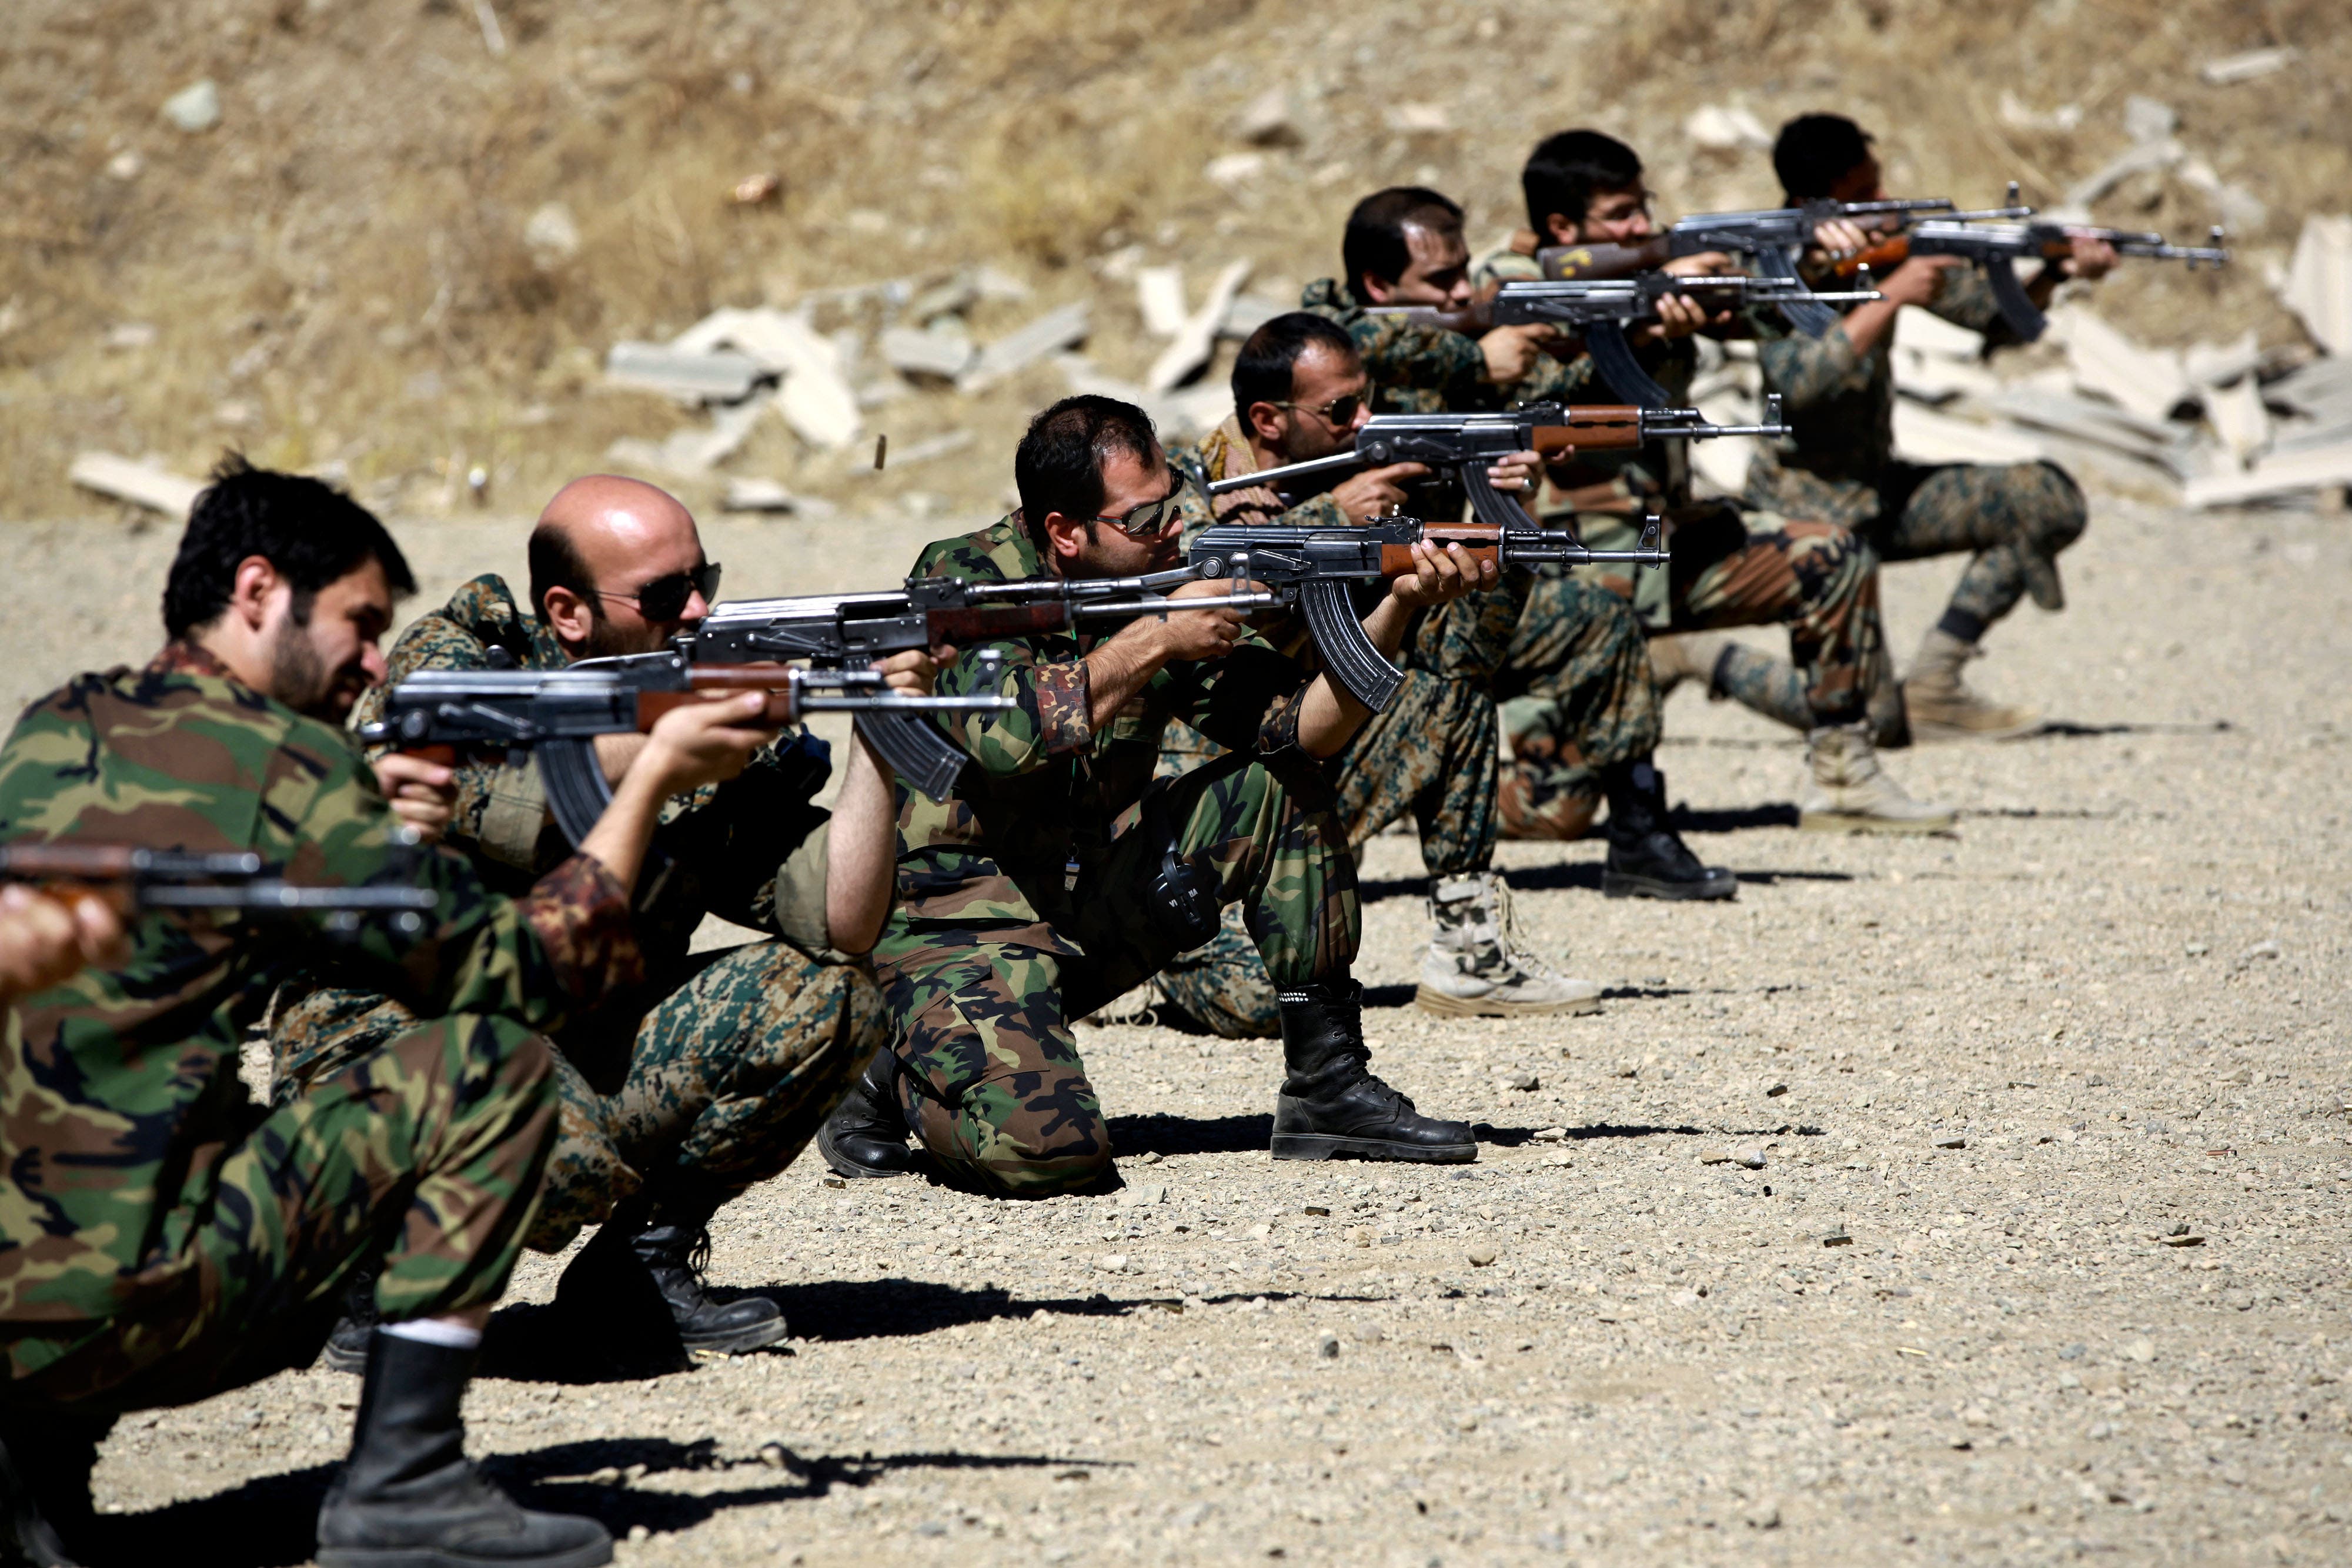 In this Thursday, Sept. 19, 2013 photo, members of the Basij paramilitary militia fire their weapons during a training session, in Tehran, Iran. AP